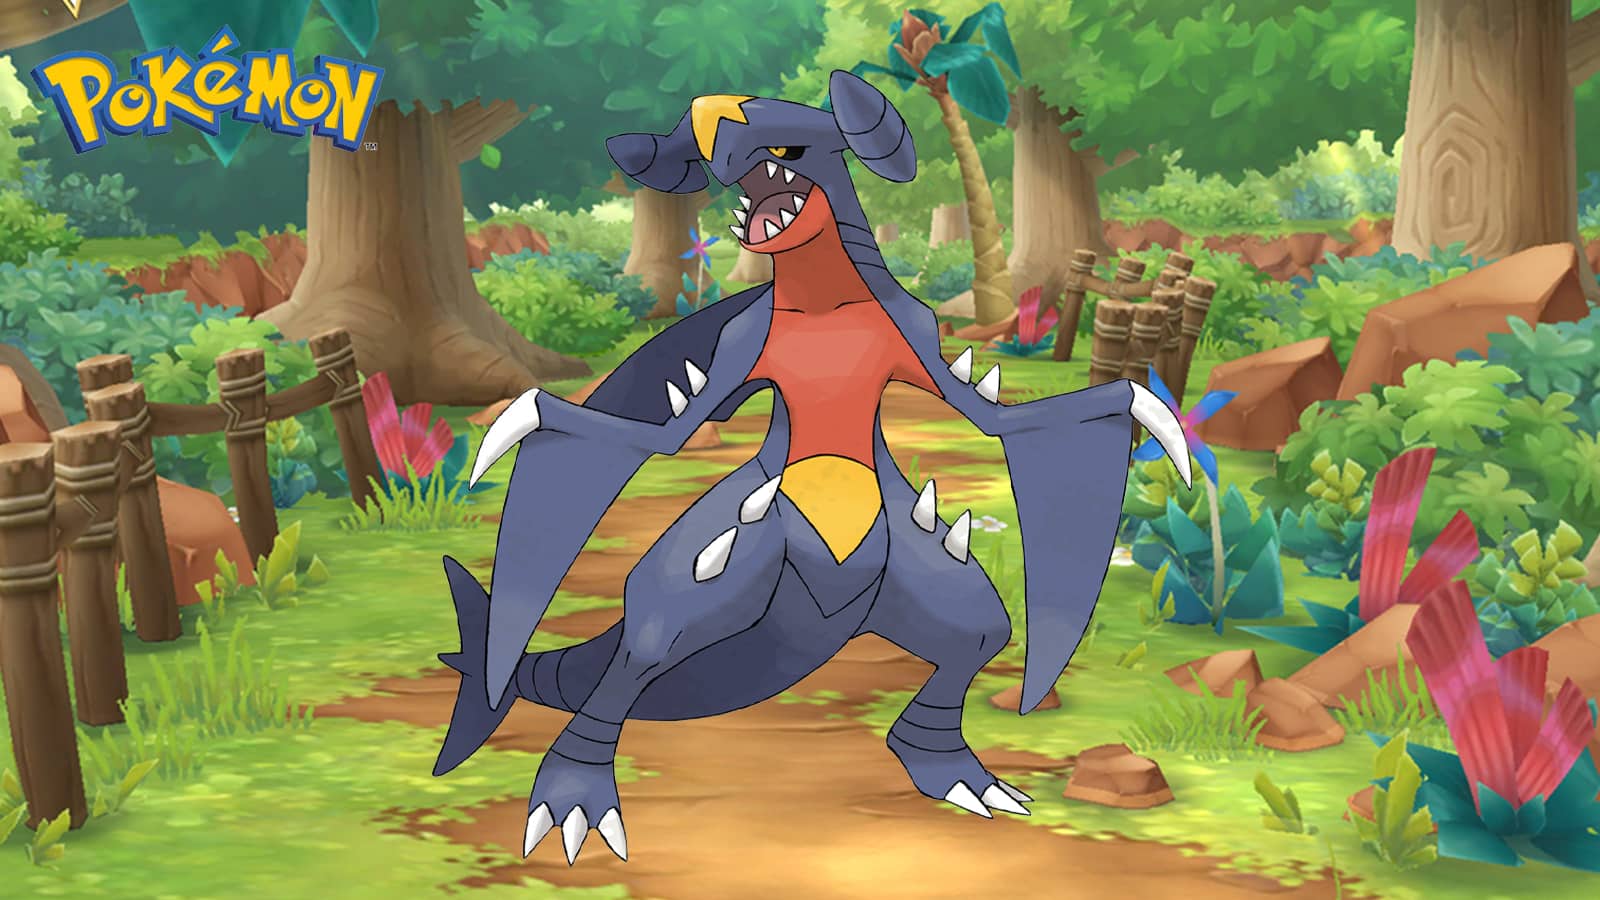 Garchomp appearing in Pokemon with its weaknesses